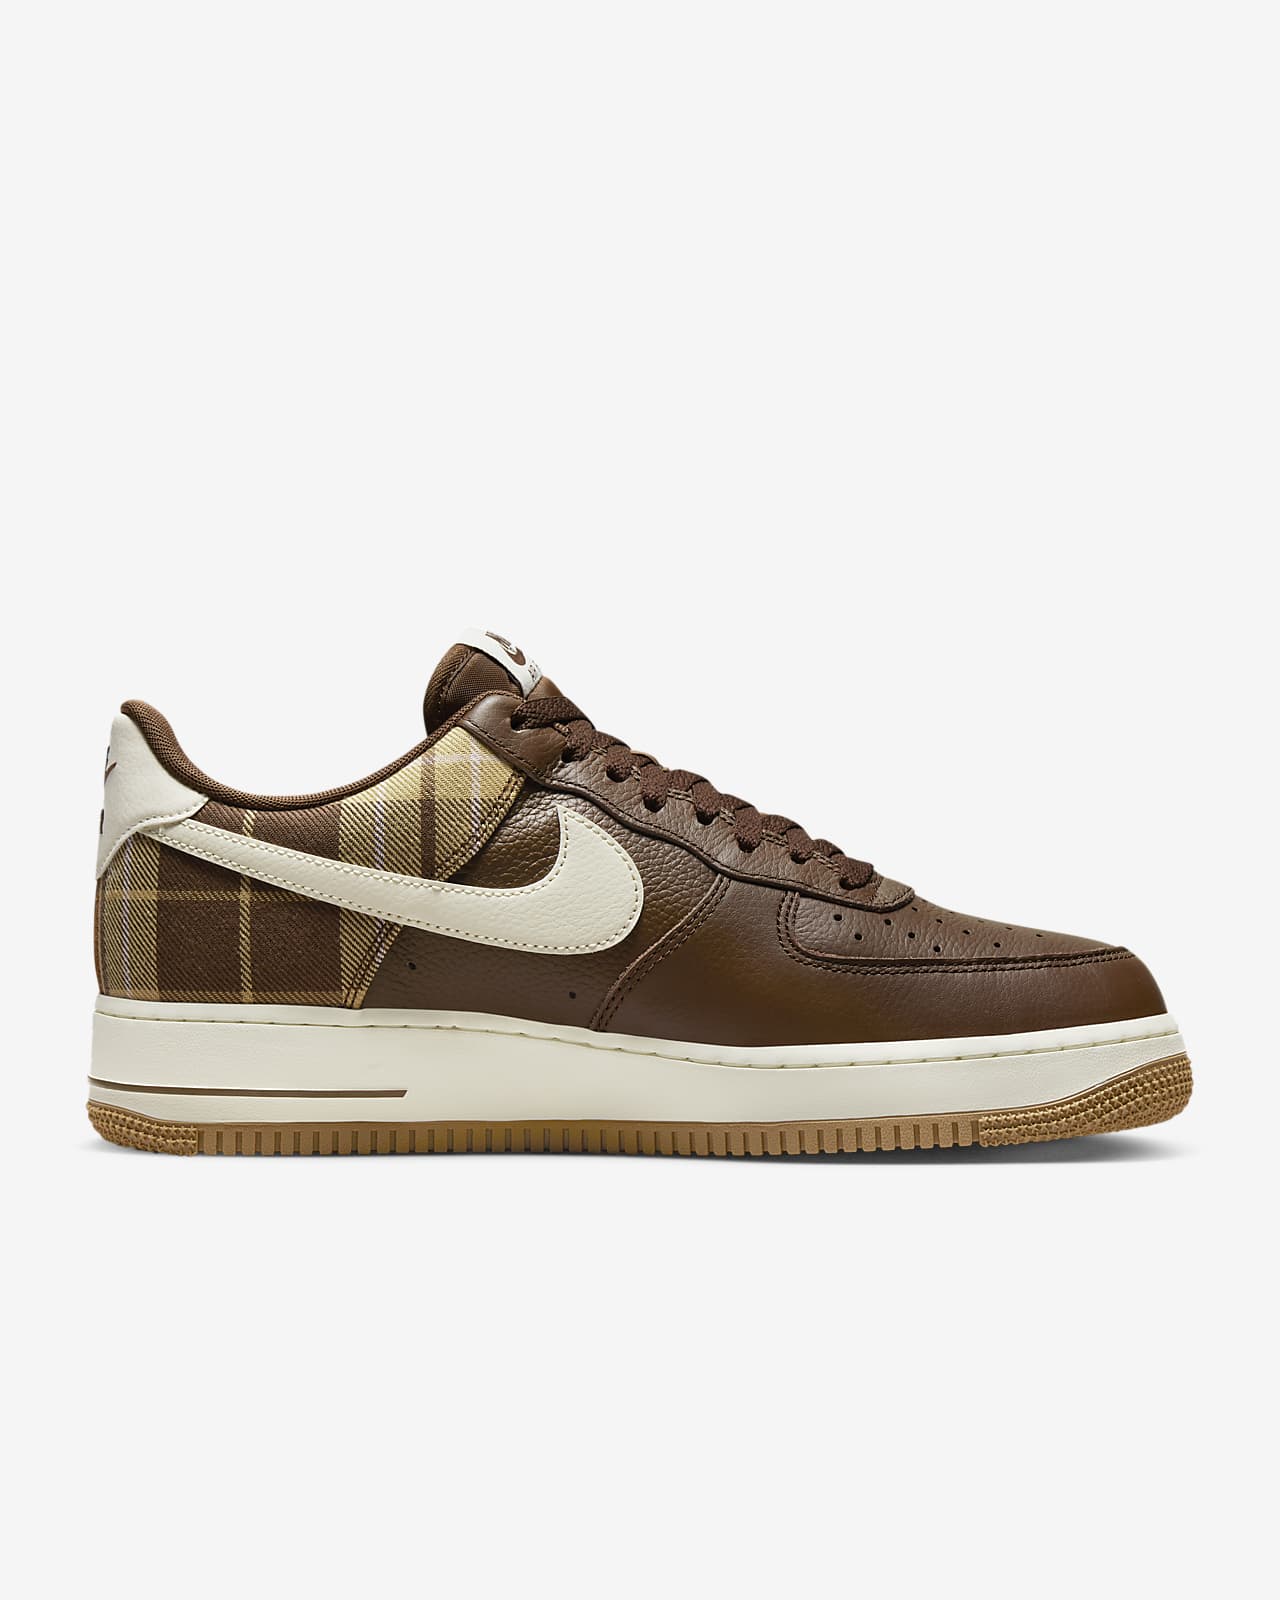 Nike Air Force 1 '07 Men's Shoes 9.5